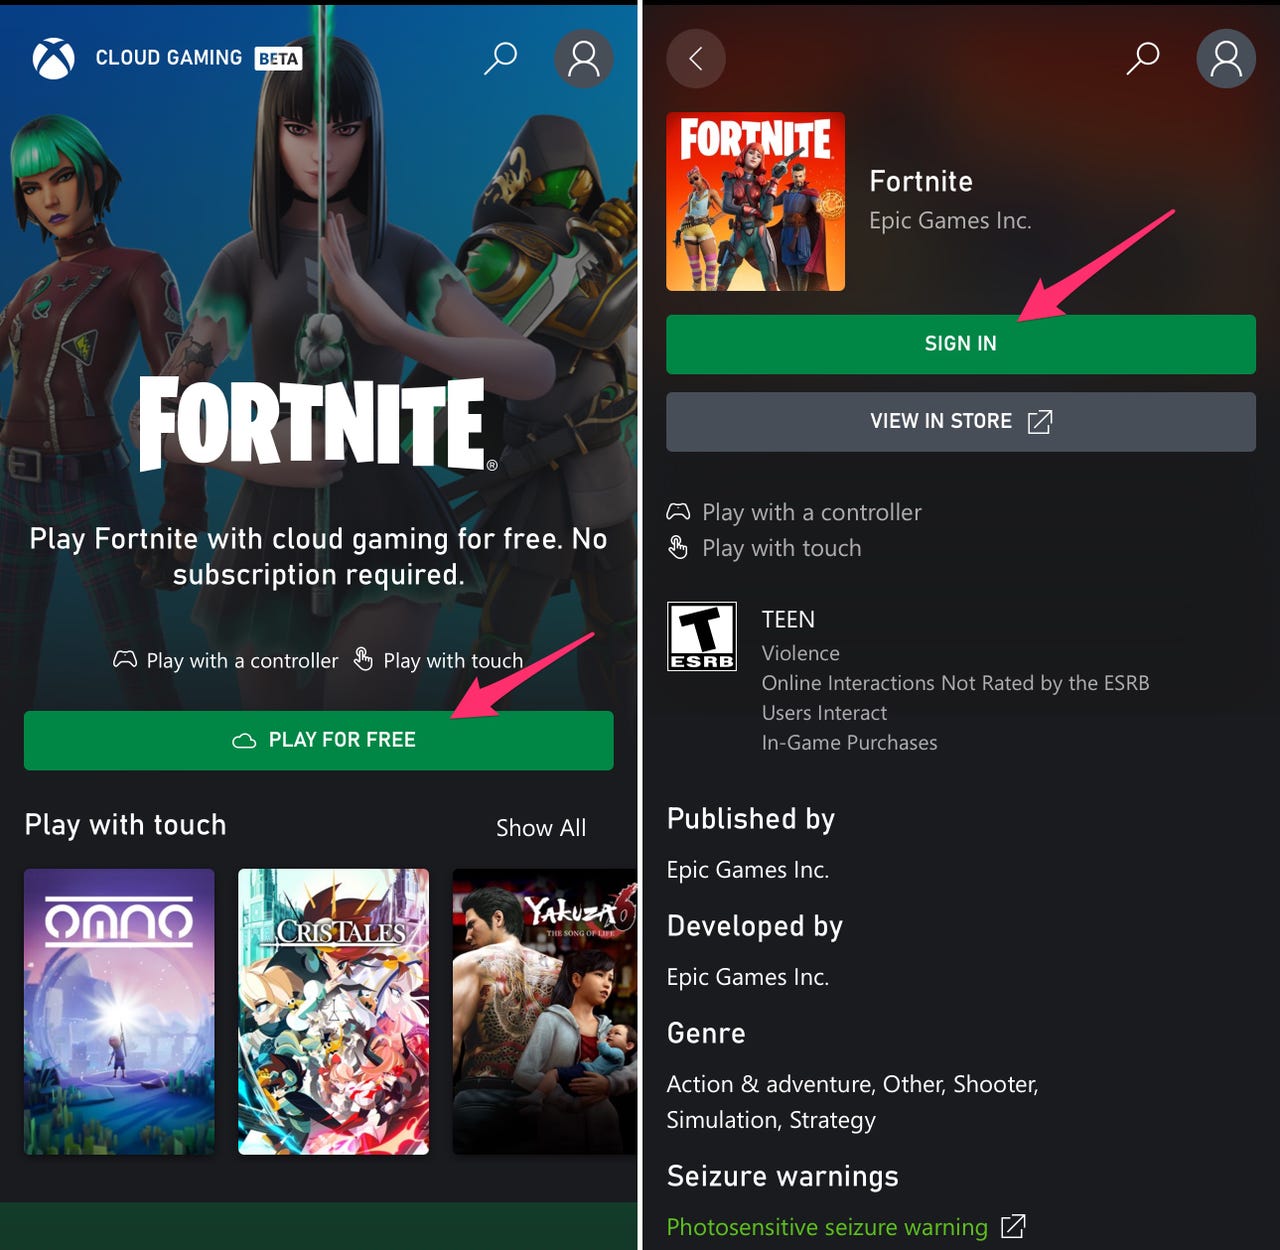 Xbox Cloud Gaming is bringing Fortnite to iOS devices for free